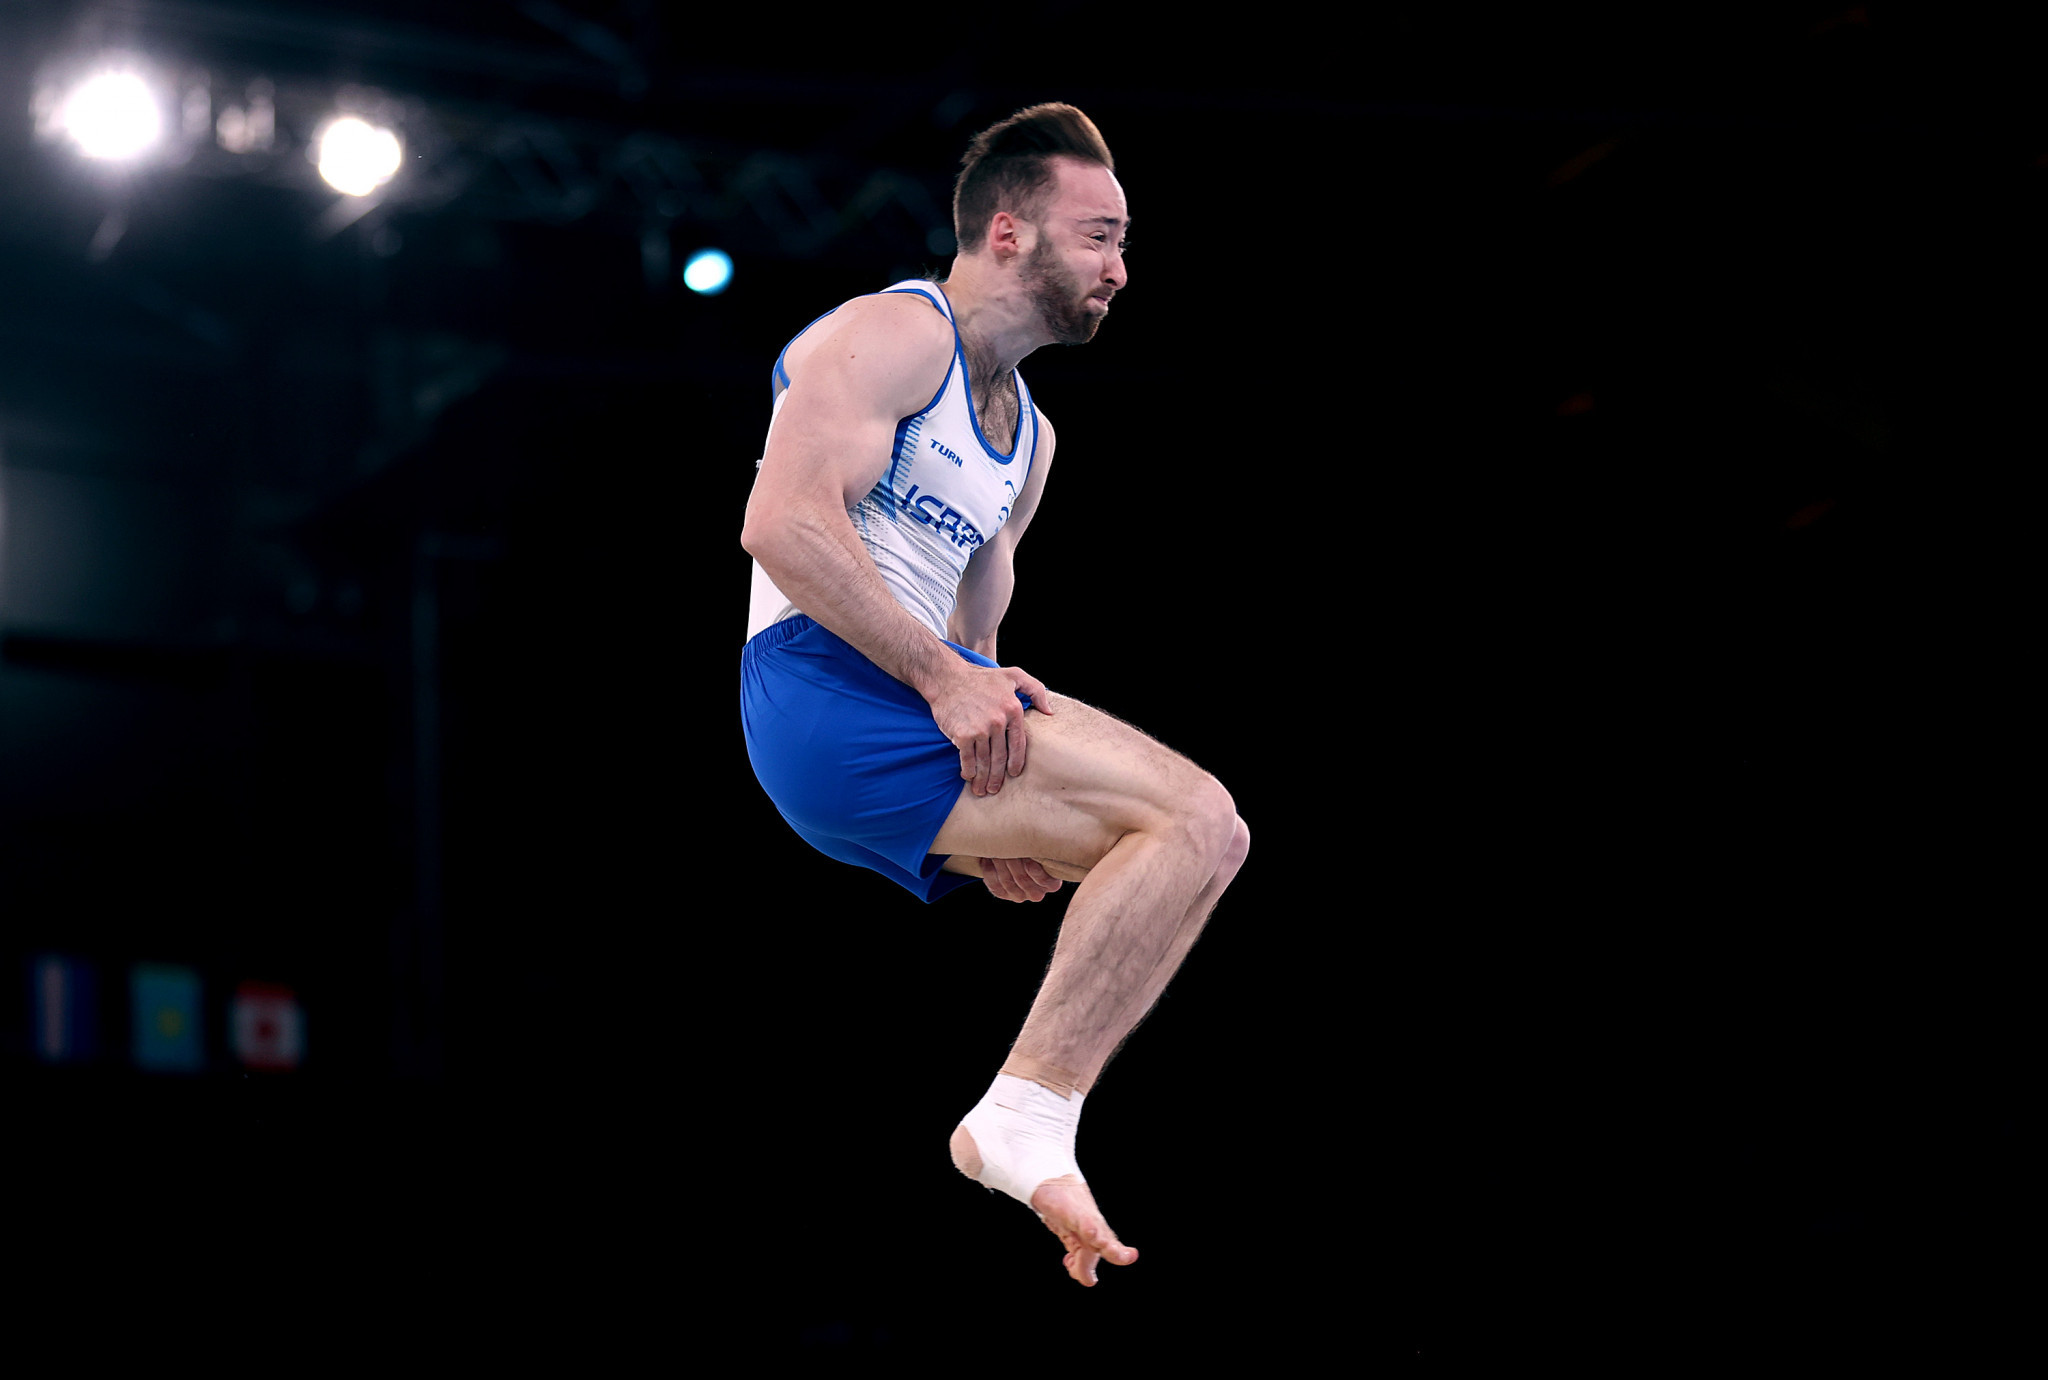 Israel's Olympic gold medallist Artem Dologpyat could add a World Cup title in Baku ©Getty Images